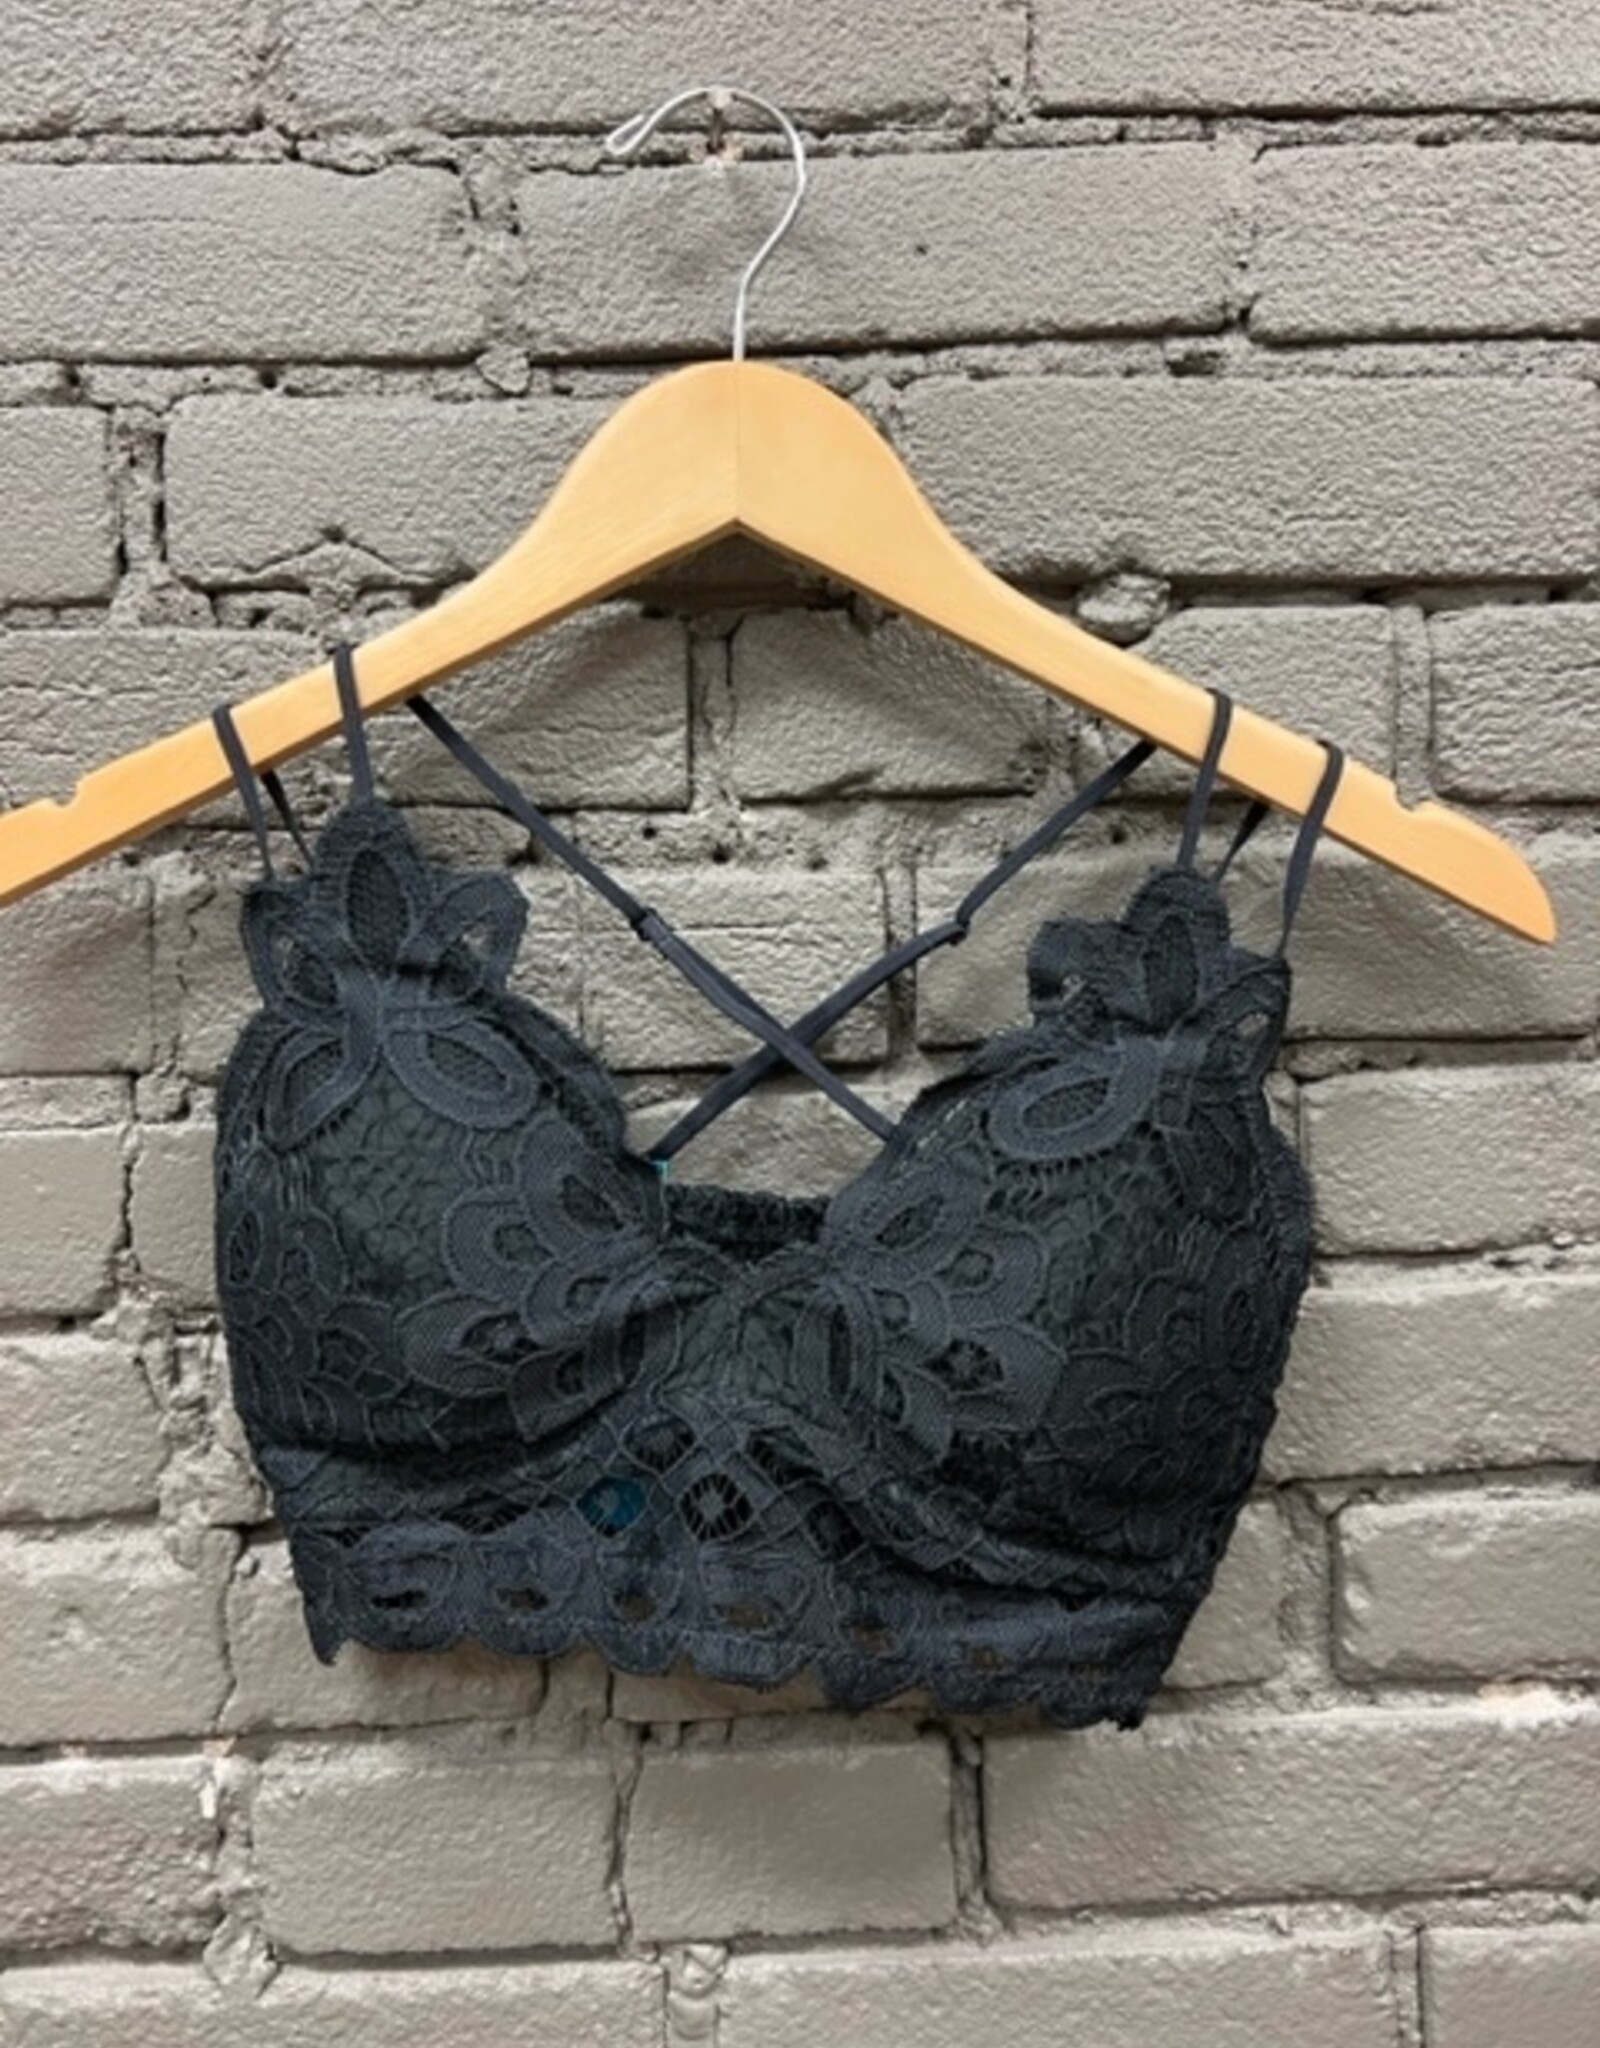 Lingerie Scalloped Lace Padded Bralette Charcoal Small